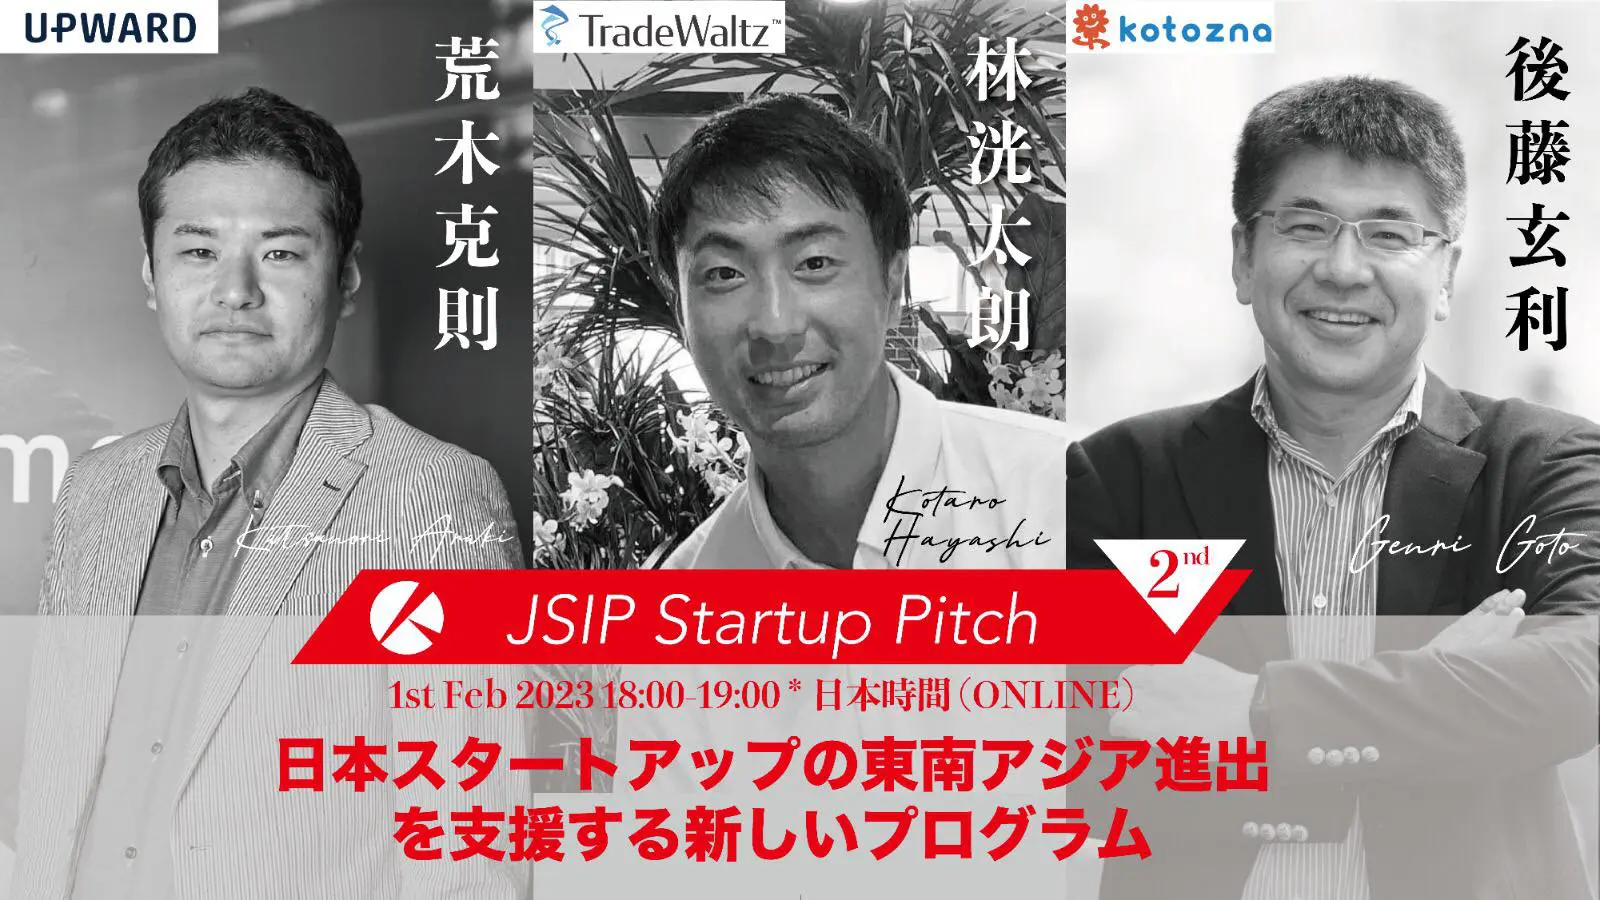 TradeWaltz has participated in startup pitch hosted by Japan-ASEAN Innovation Platform (JSIP).